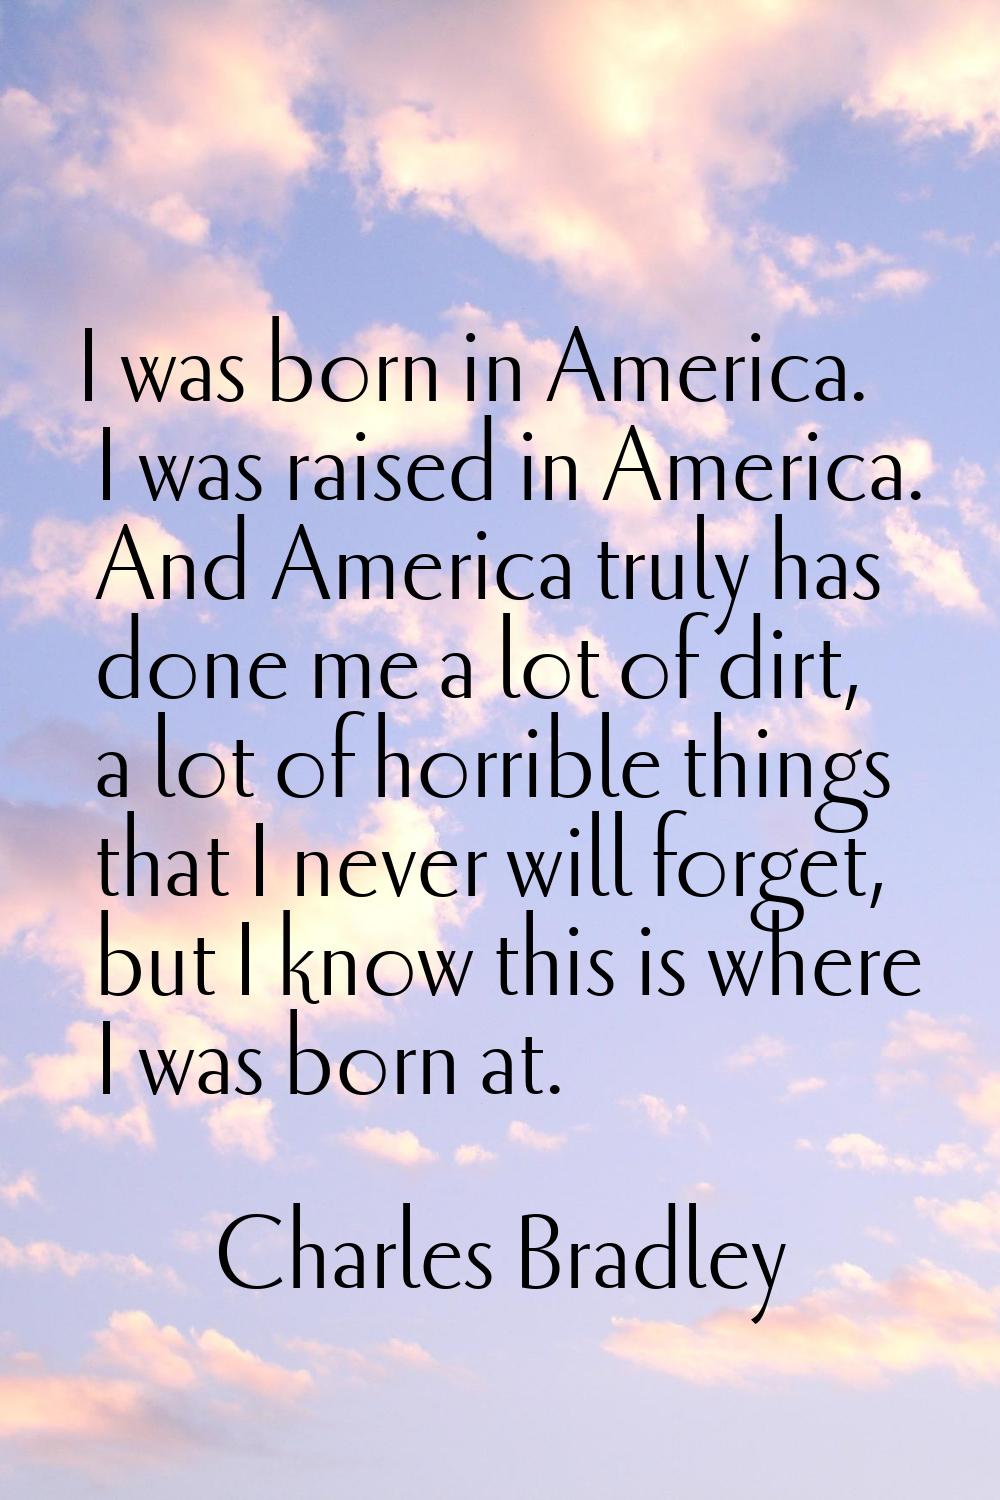 I was born in America. I was raised in America. And America truly has done me a lot of dirt, a lot 